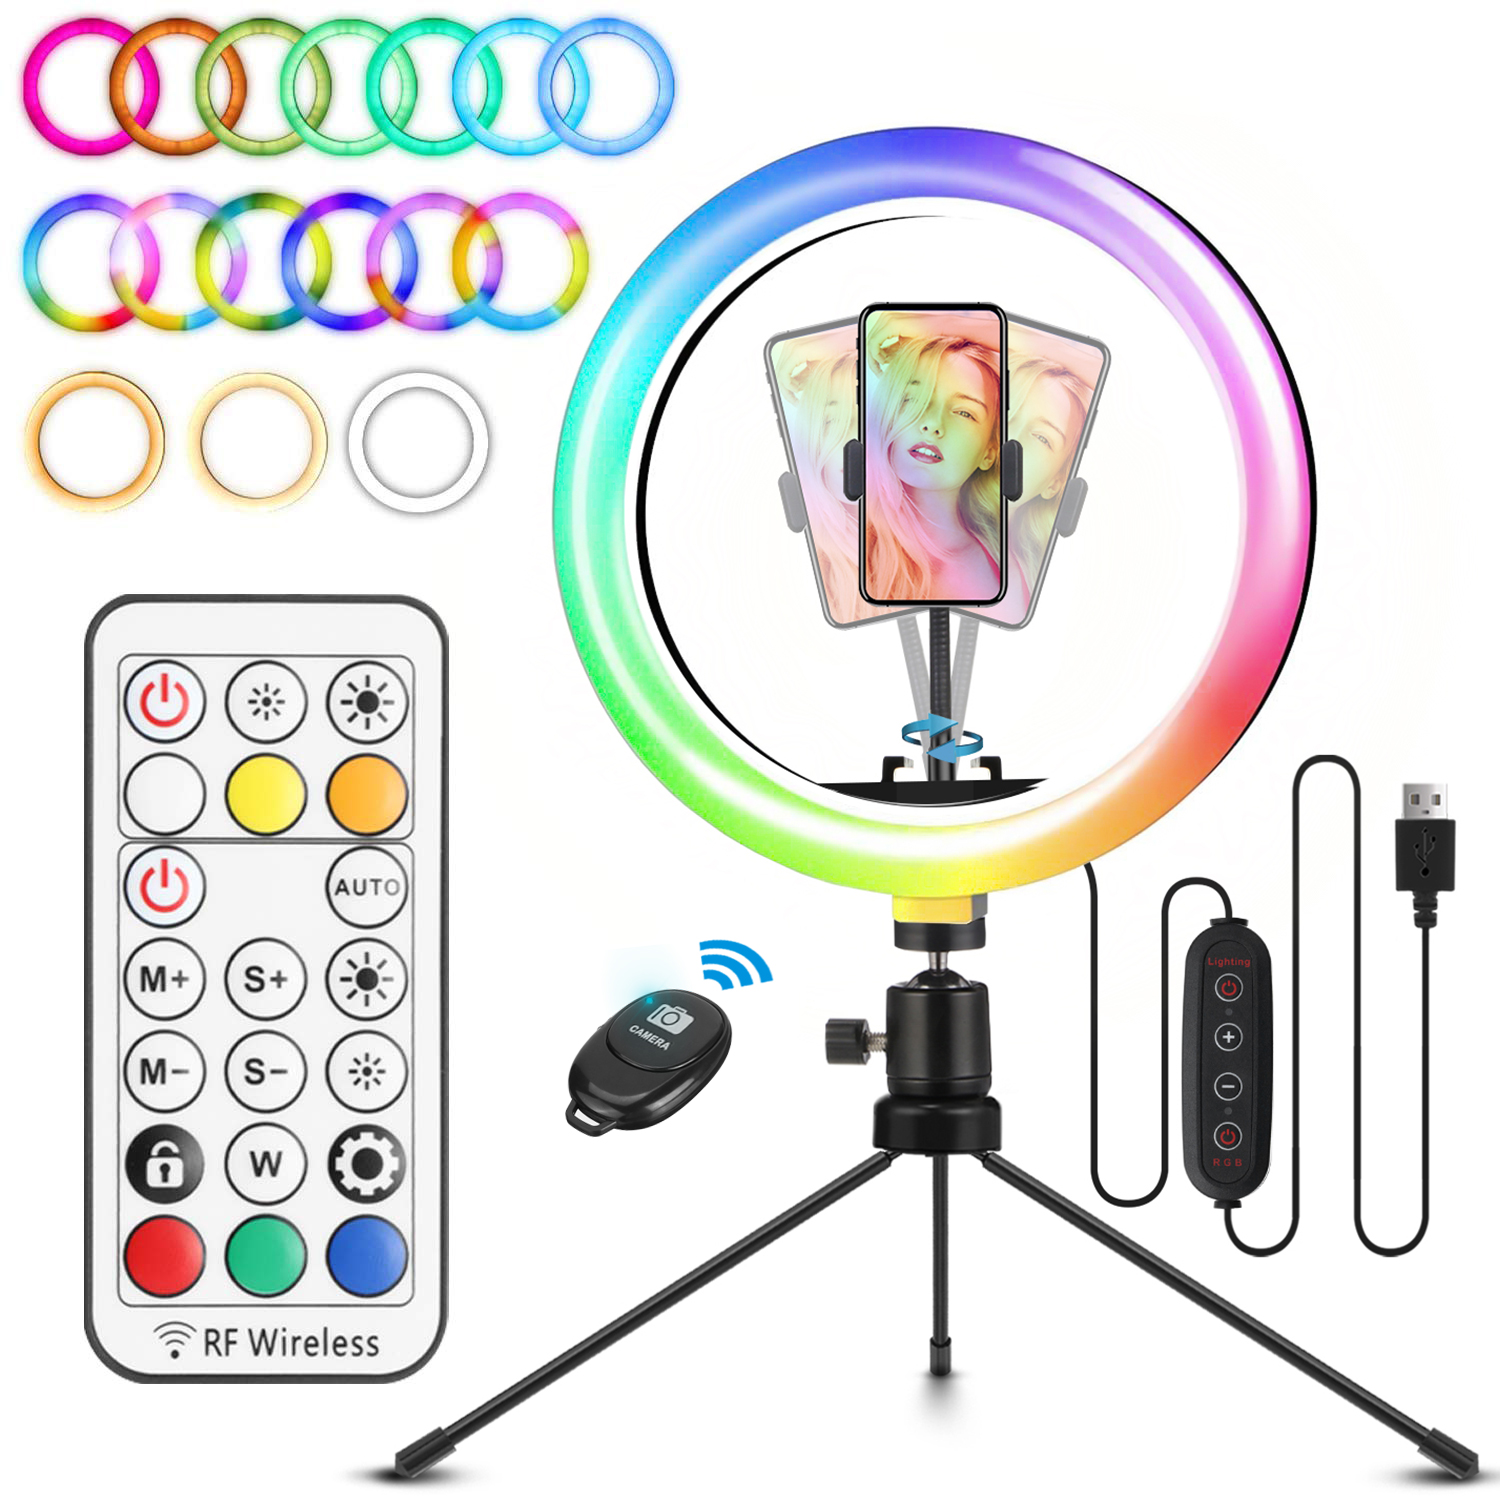 Neewer 10-inch RGB Ring Light Selfie Light Ring with Tripod Stand & Phone  Holder, Remote Control, Dimmable LED Desk Ringlight 29 Colors Modes for